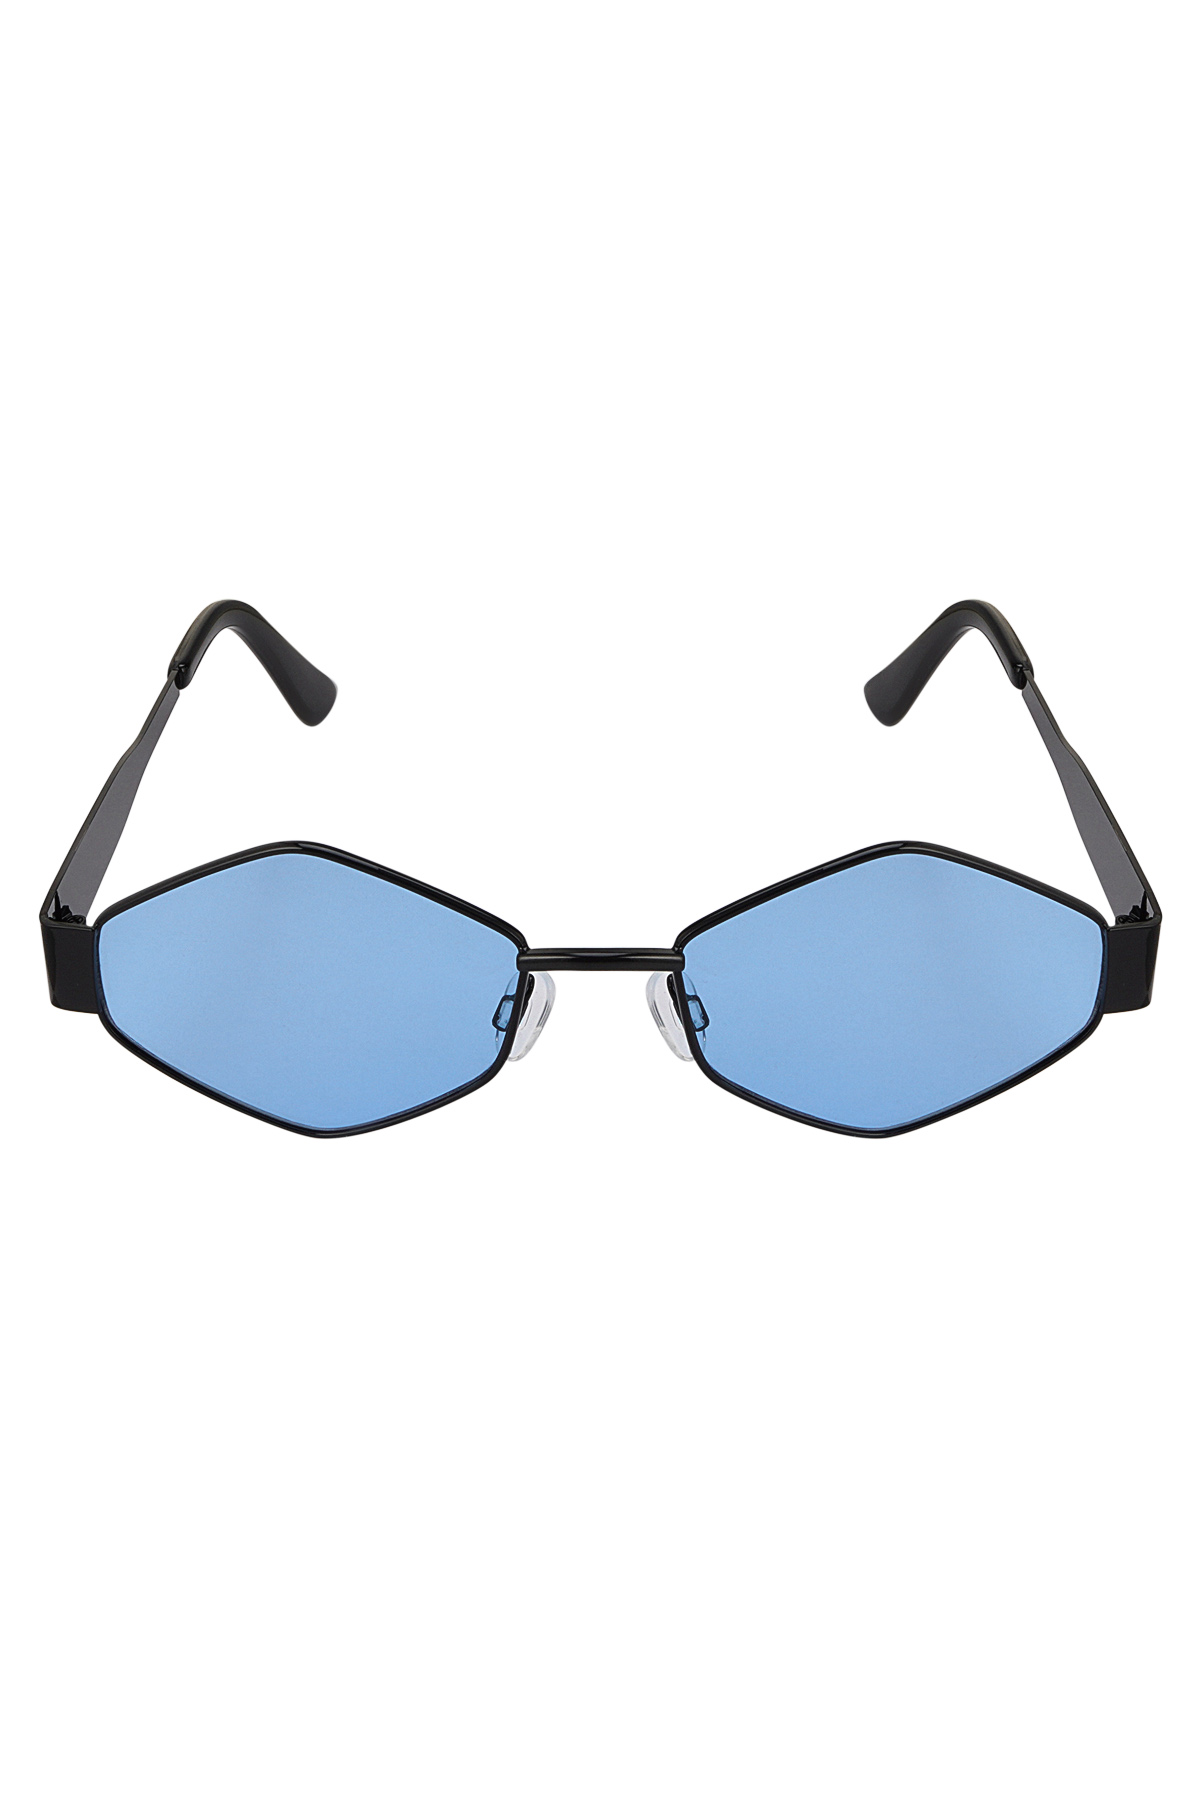 Sunglasses all night long - blue h5 Picture6